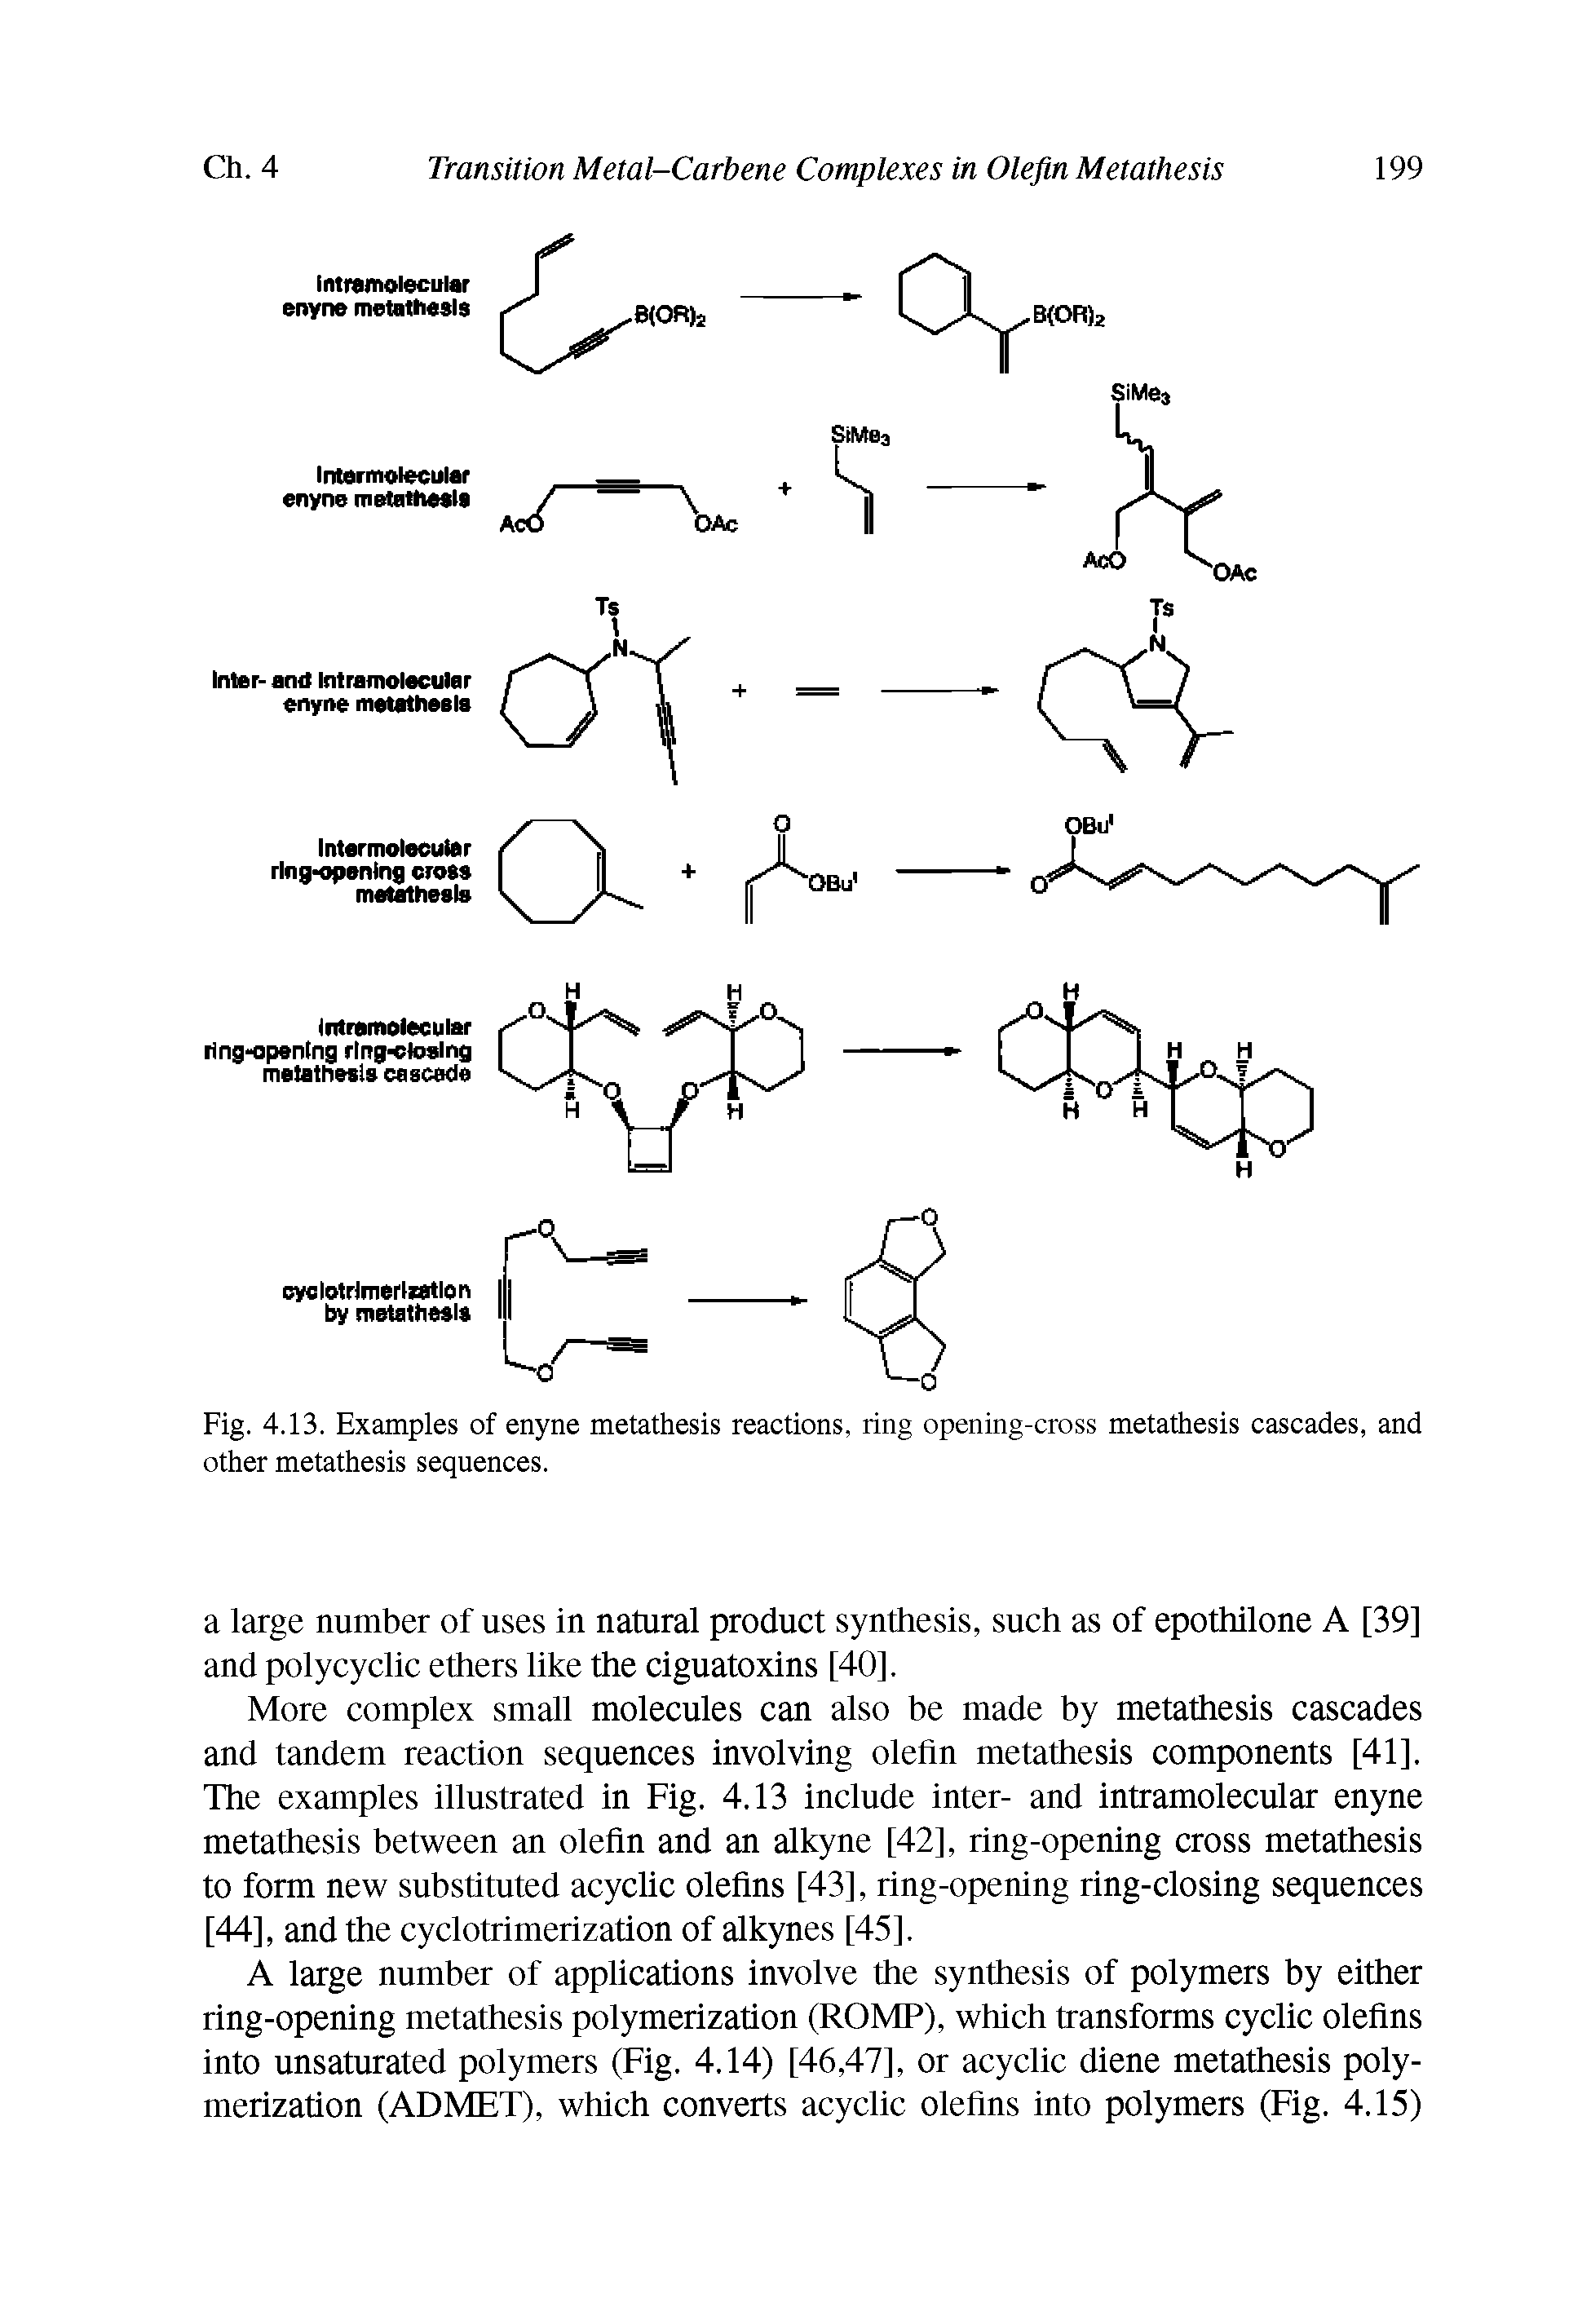 Fig. 4.13. Examples of enyne metathesis reactions, ring opening-cross metathesis cascades, and other metathesis sequences.